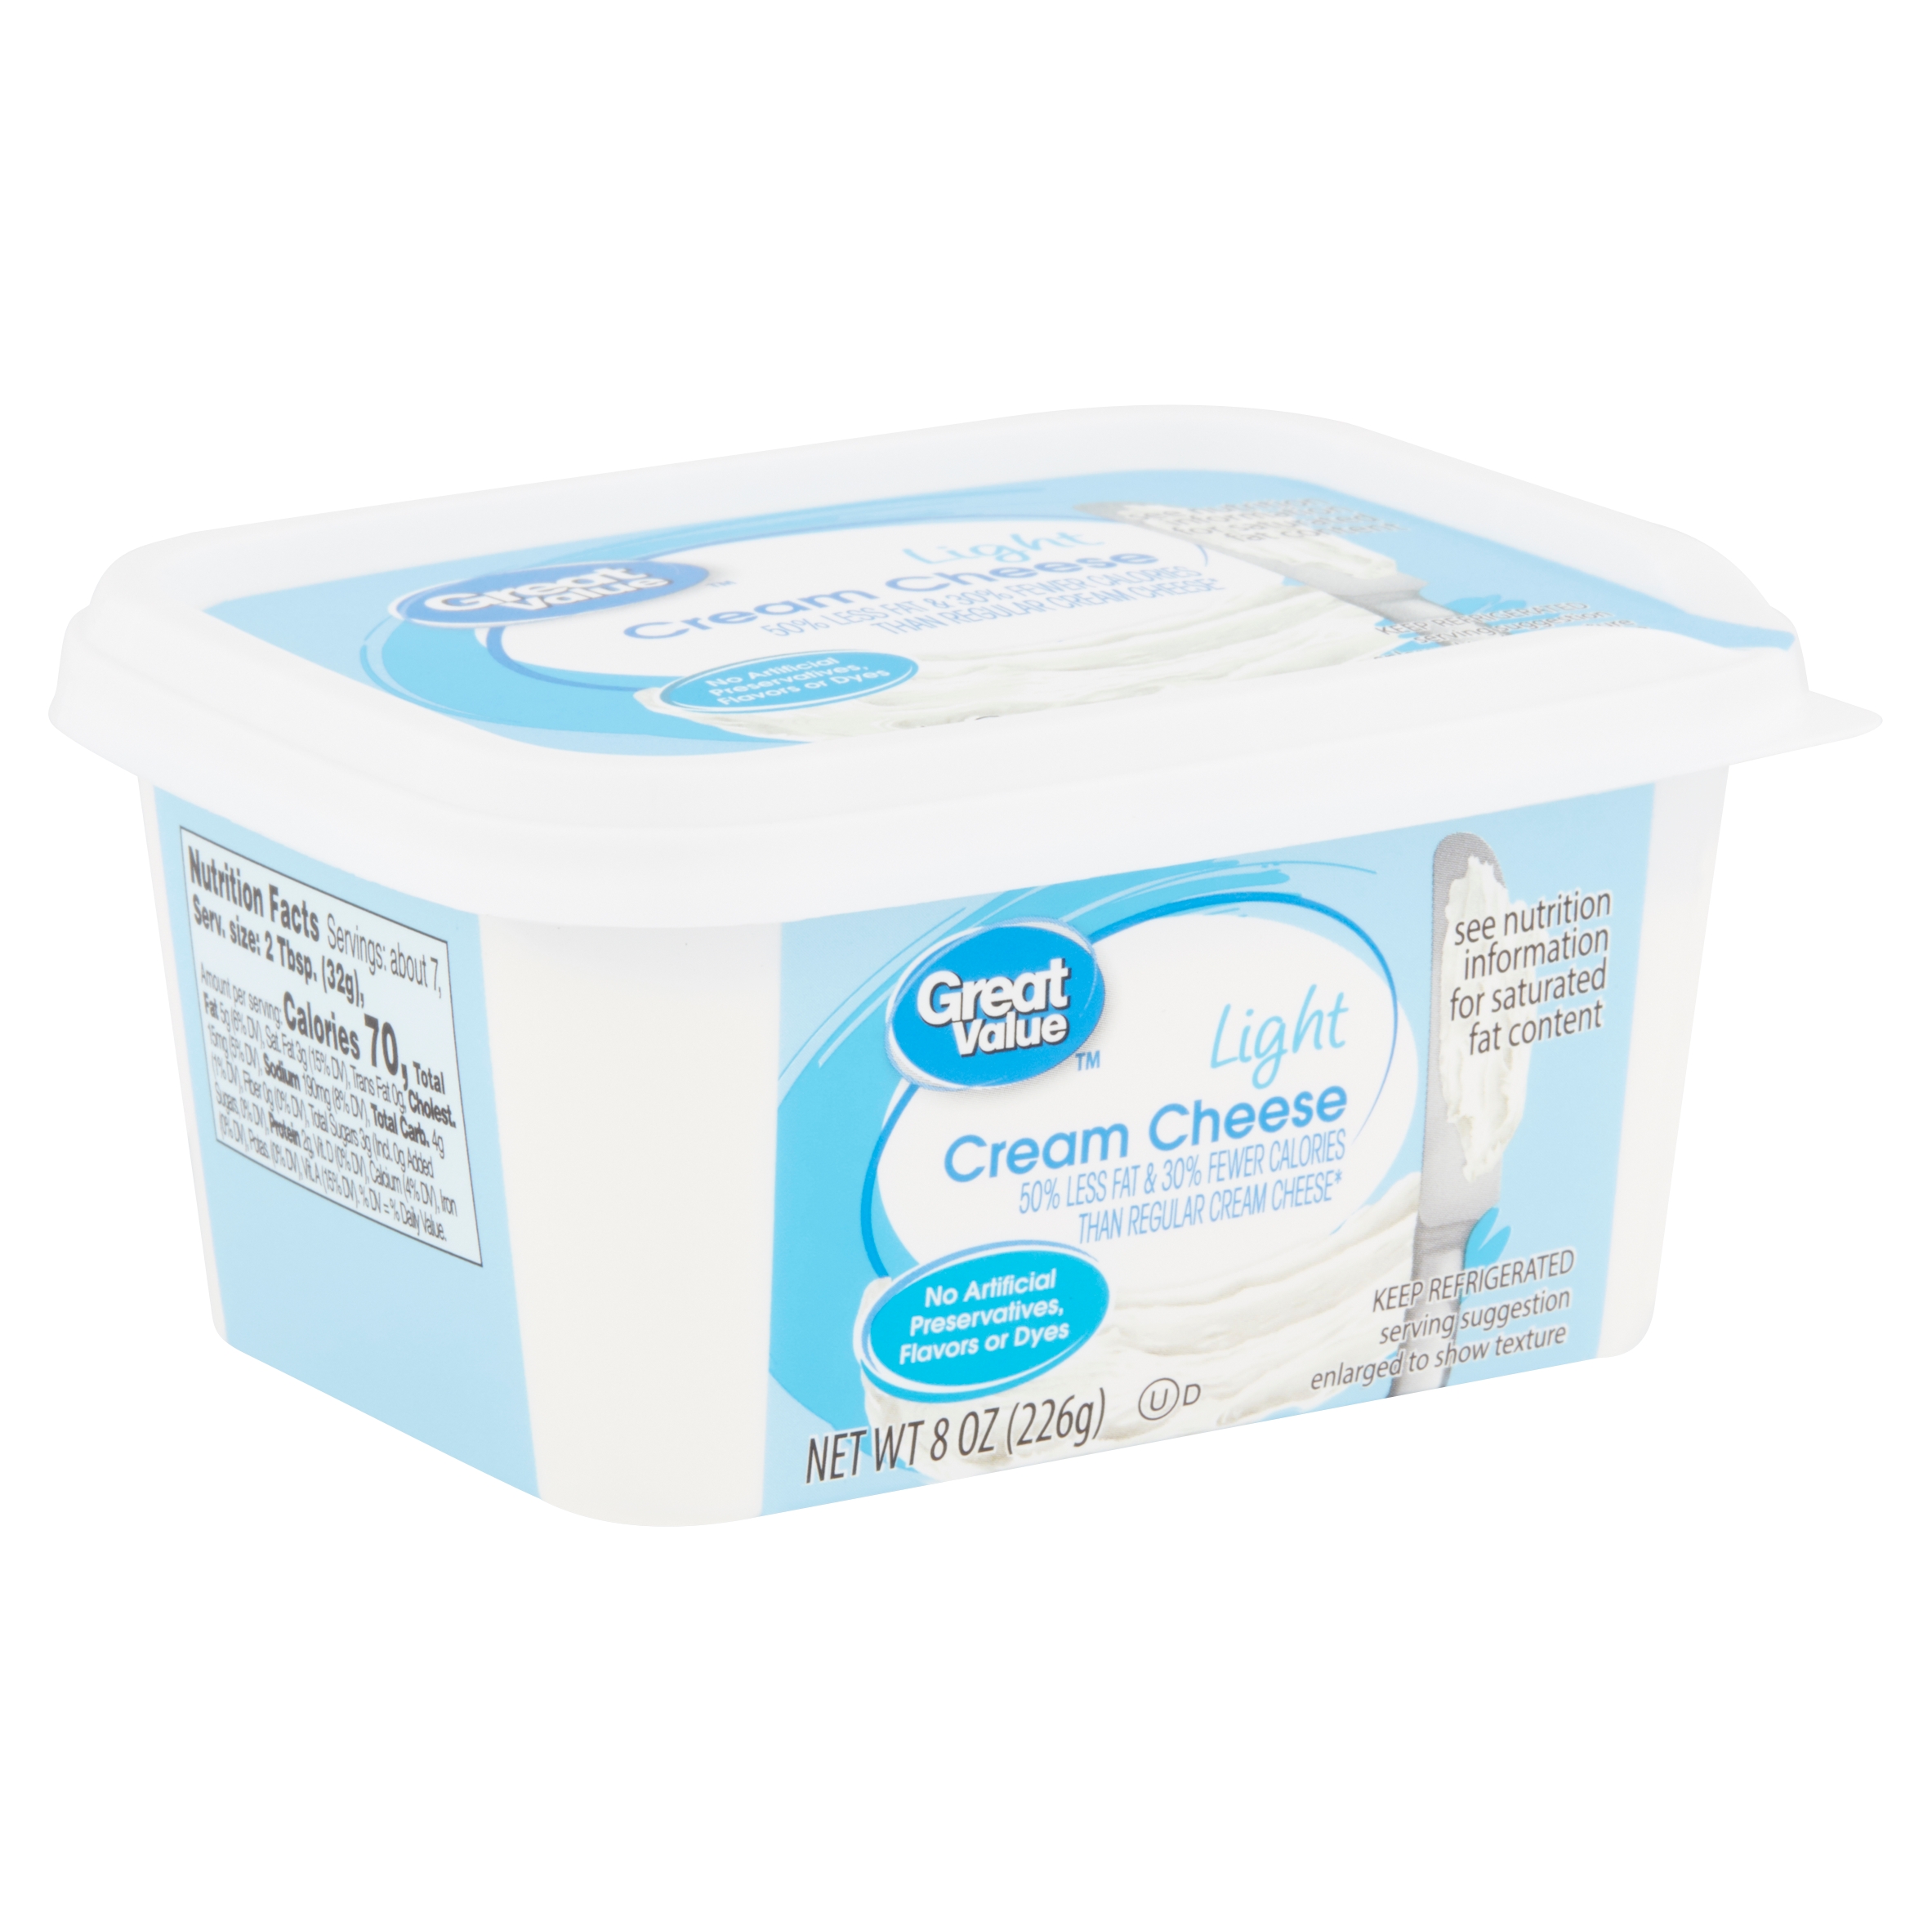 Great Value Light Cream Cheese, 8 oz CrowdedLine Delivery